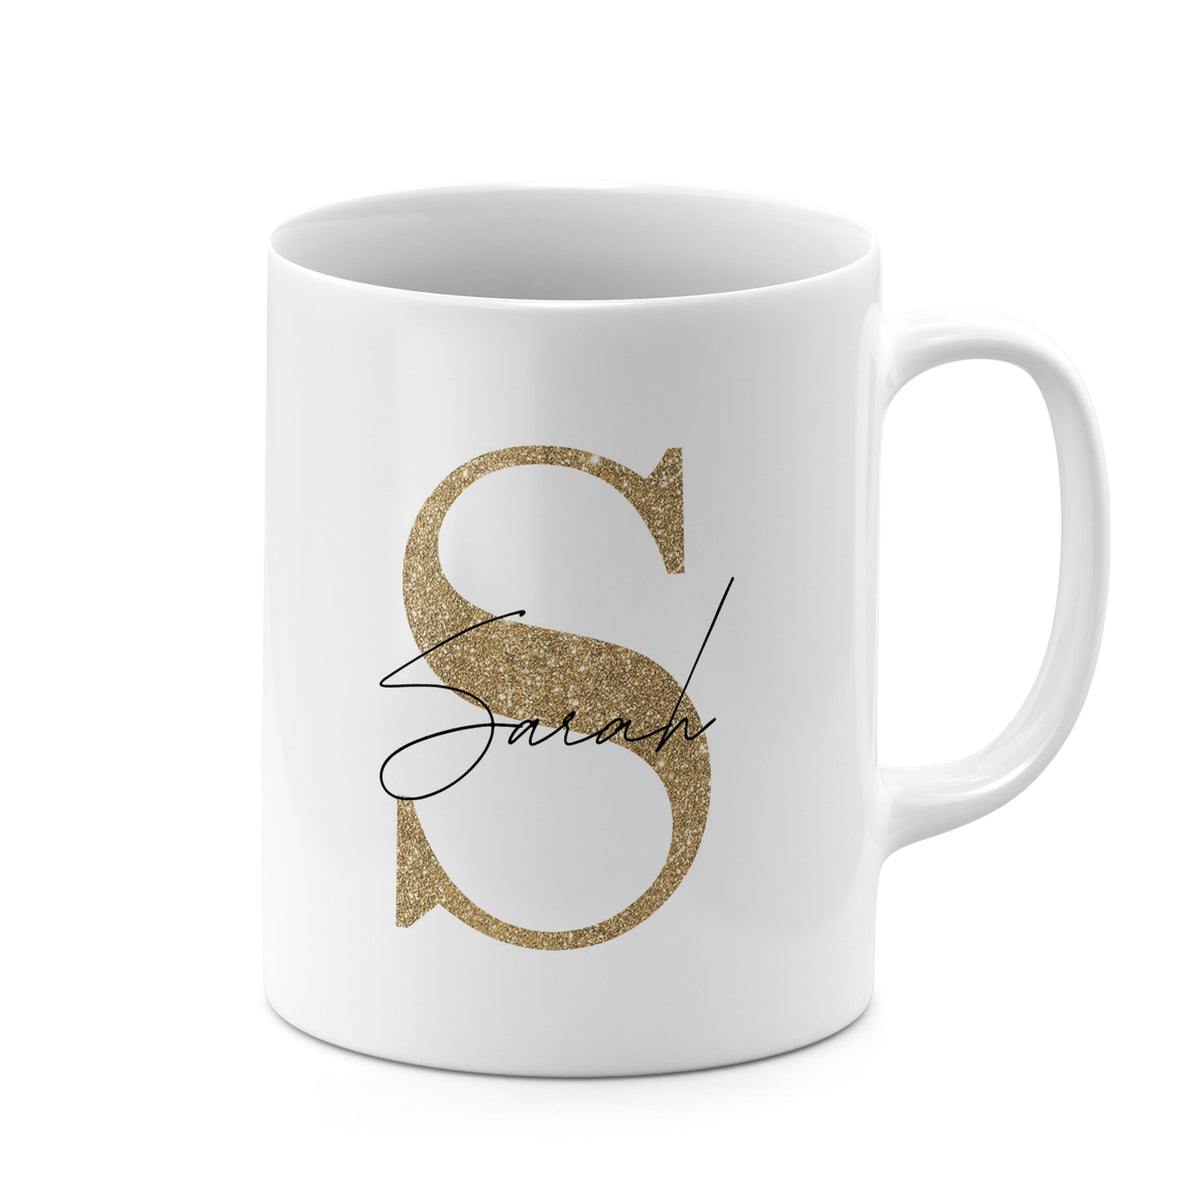 Personalised Ceramic Mug with Name Initials Text Golden Glitter Effect Monogram